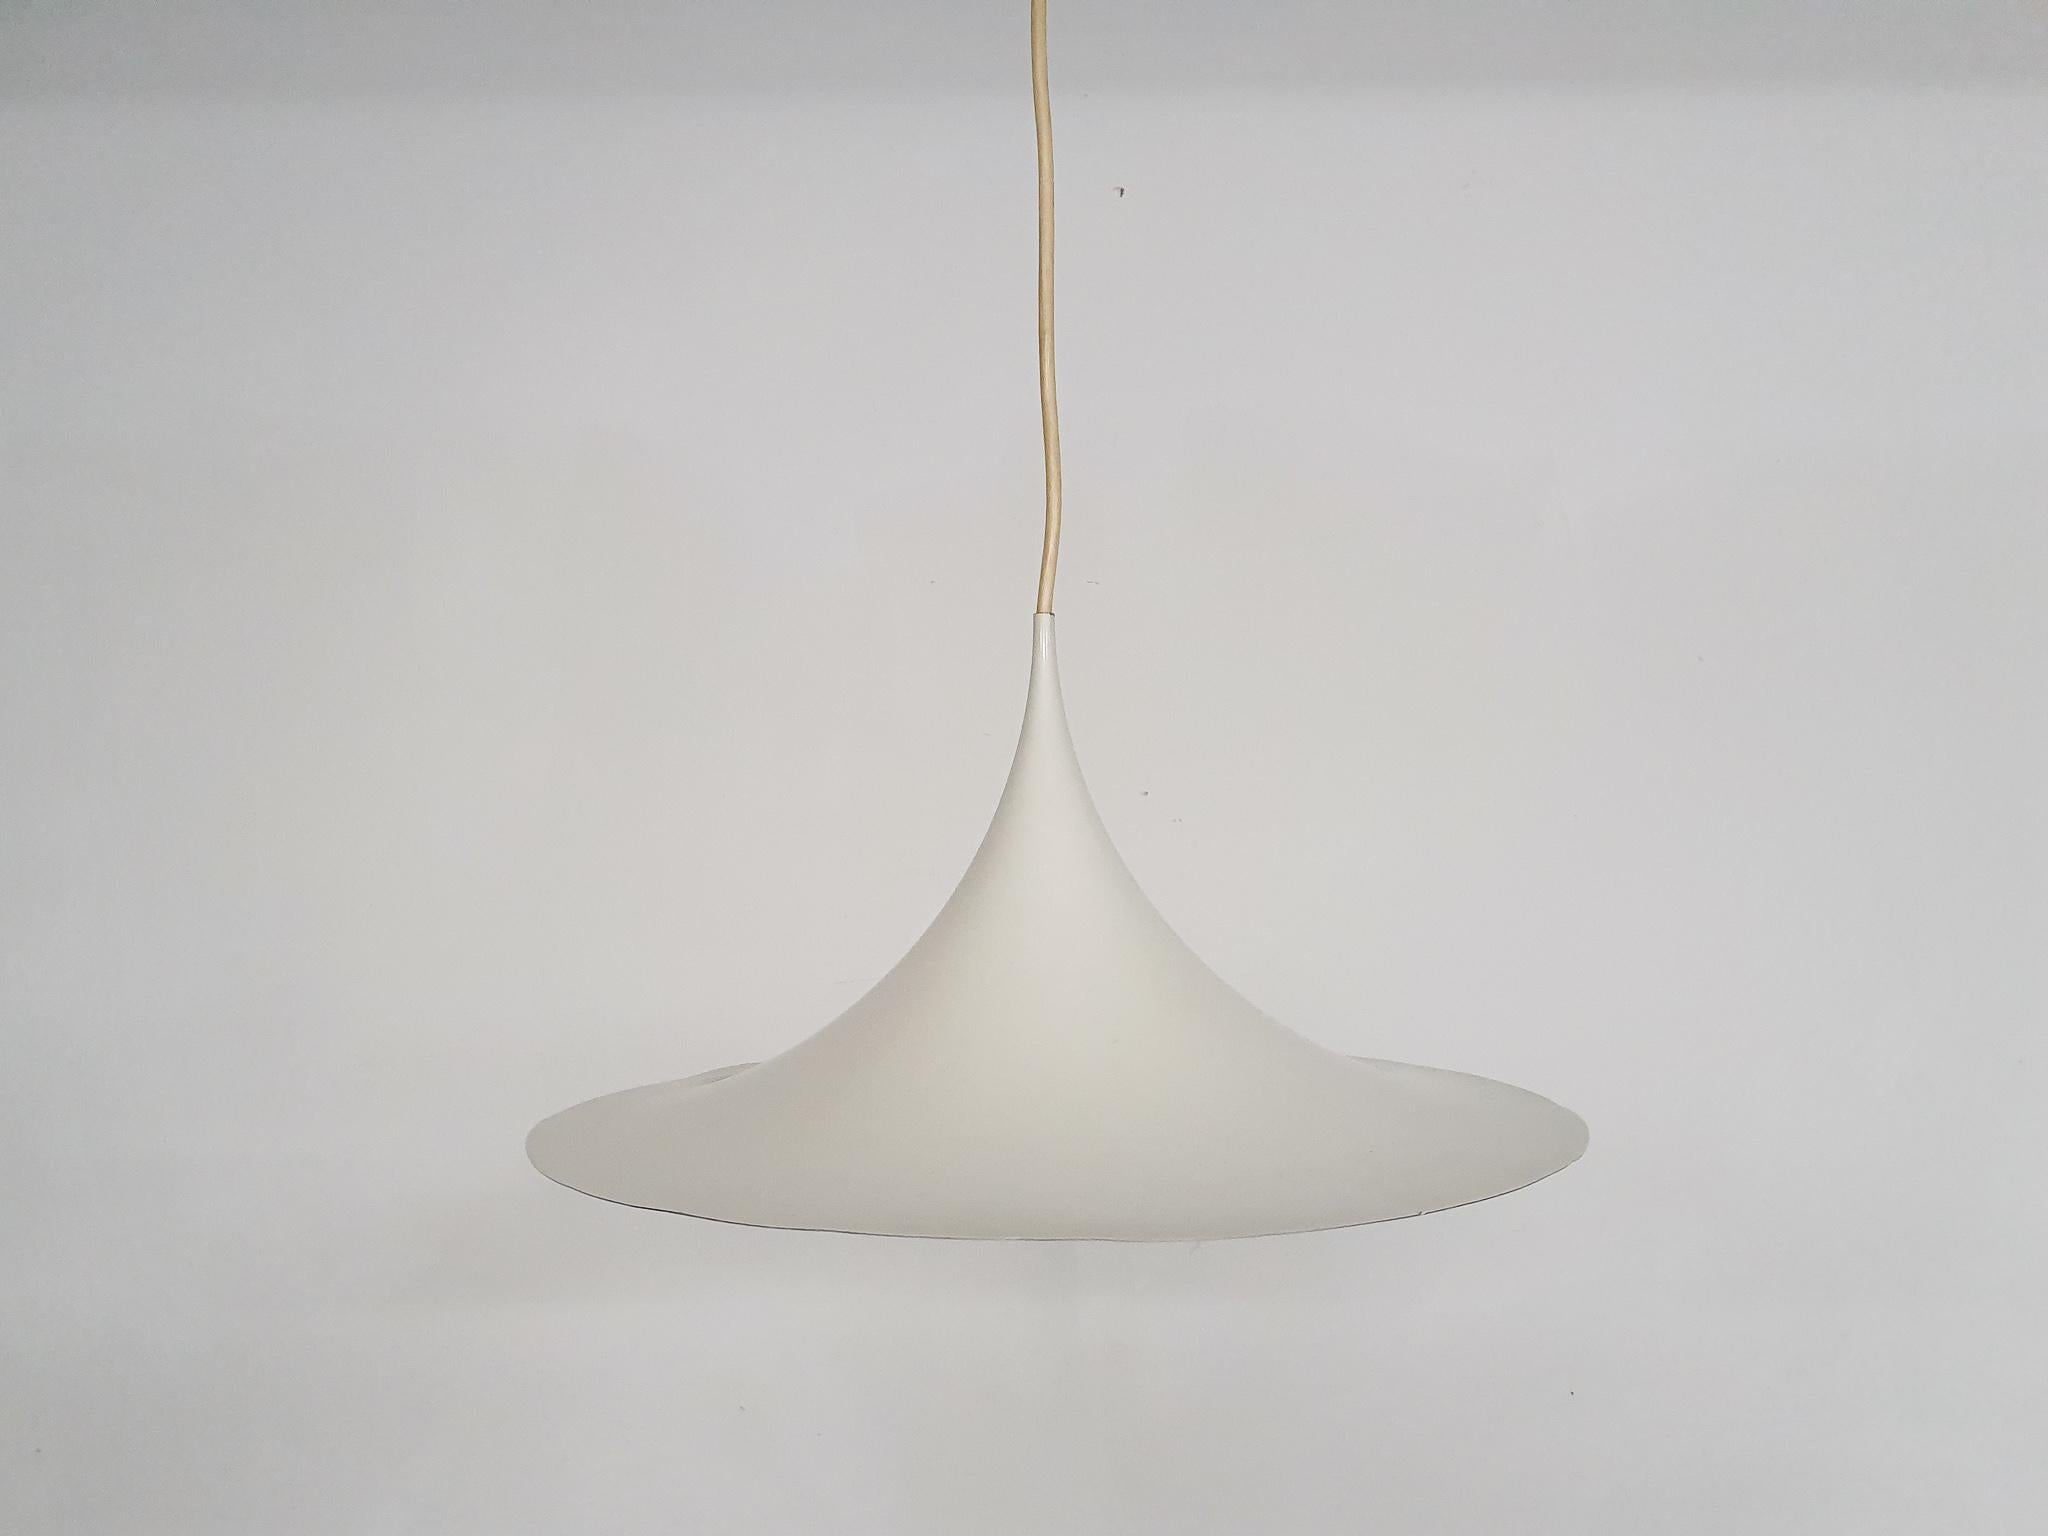 White metal pendant light by Claus Bonderup and Torsten Thorup for Fog and Morup. The metal has some dents. The paint is in good original condition.